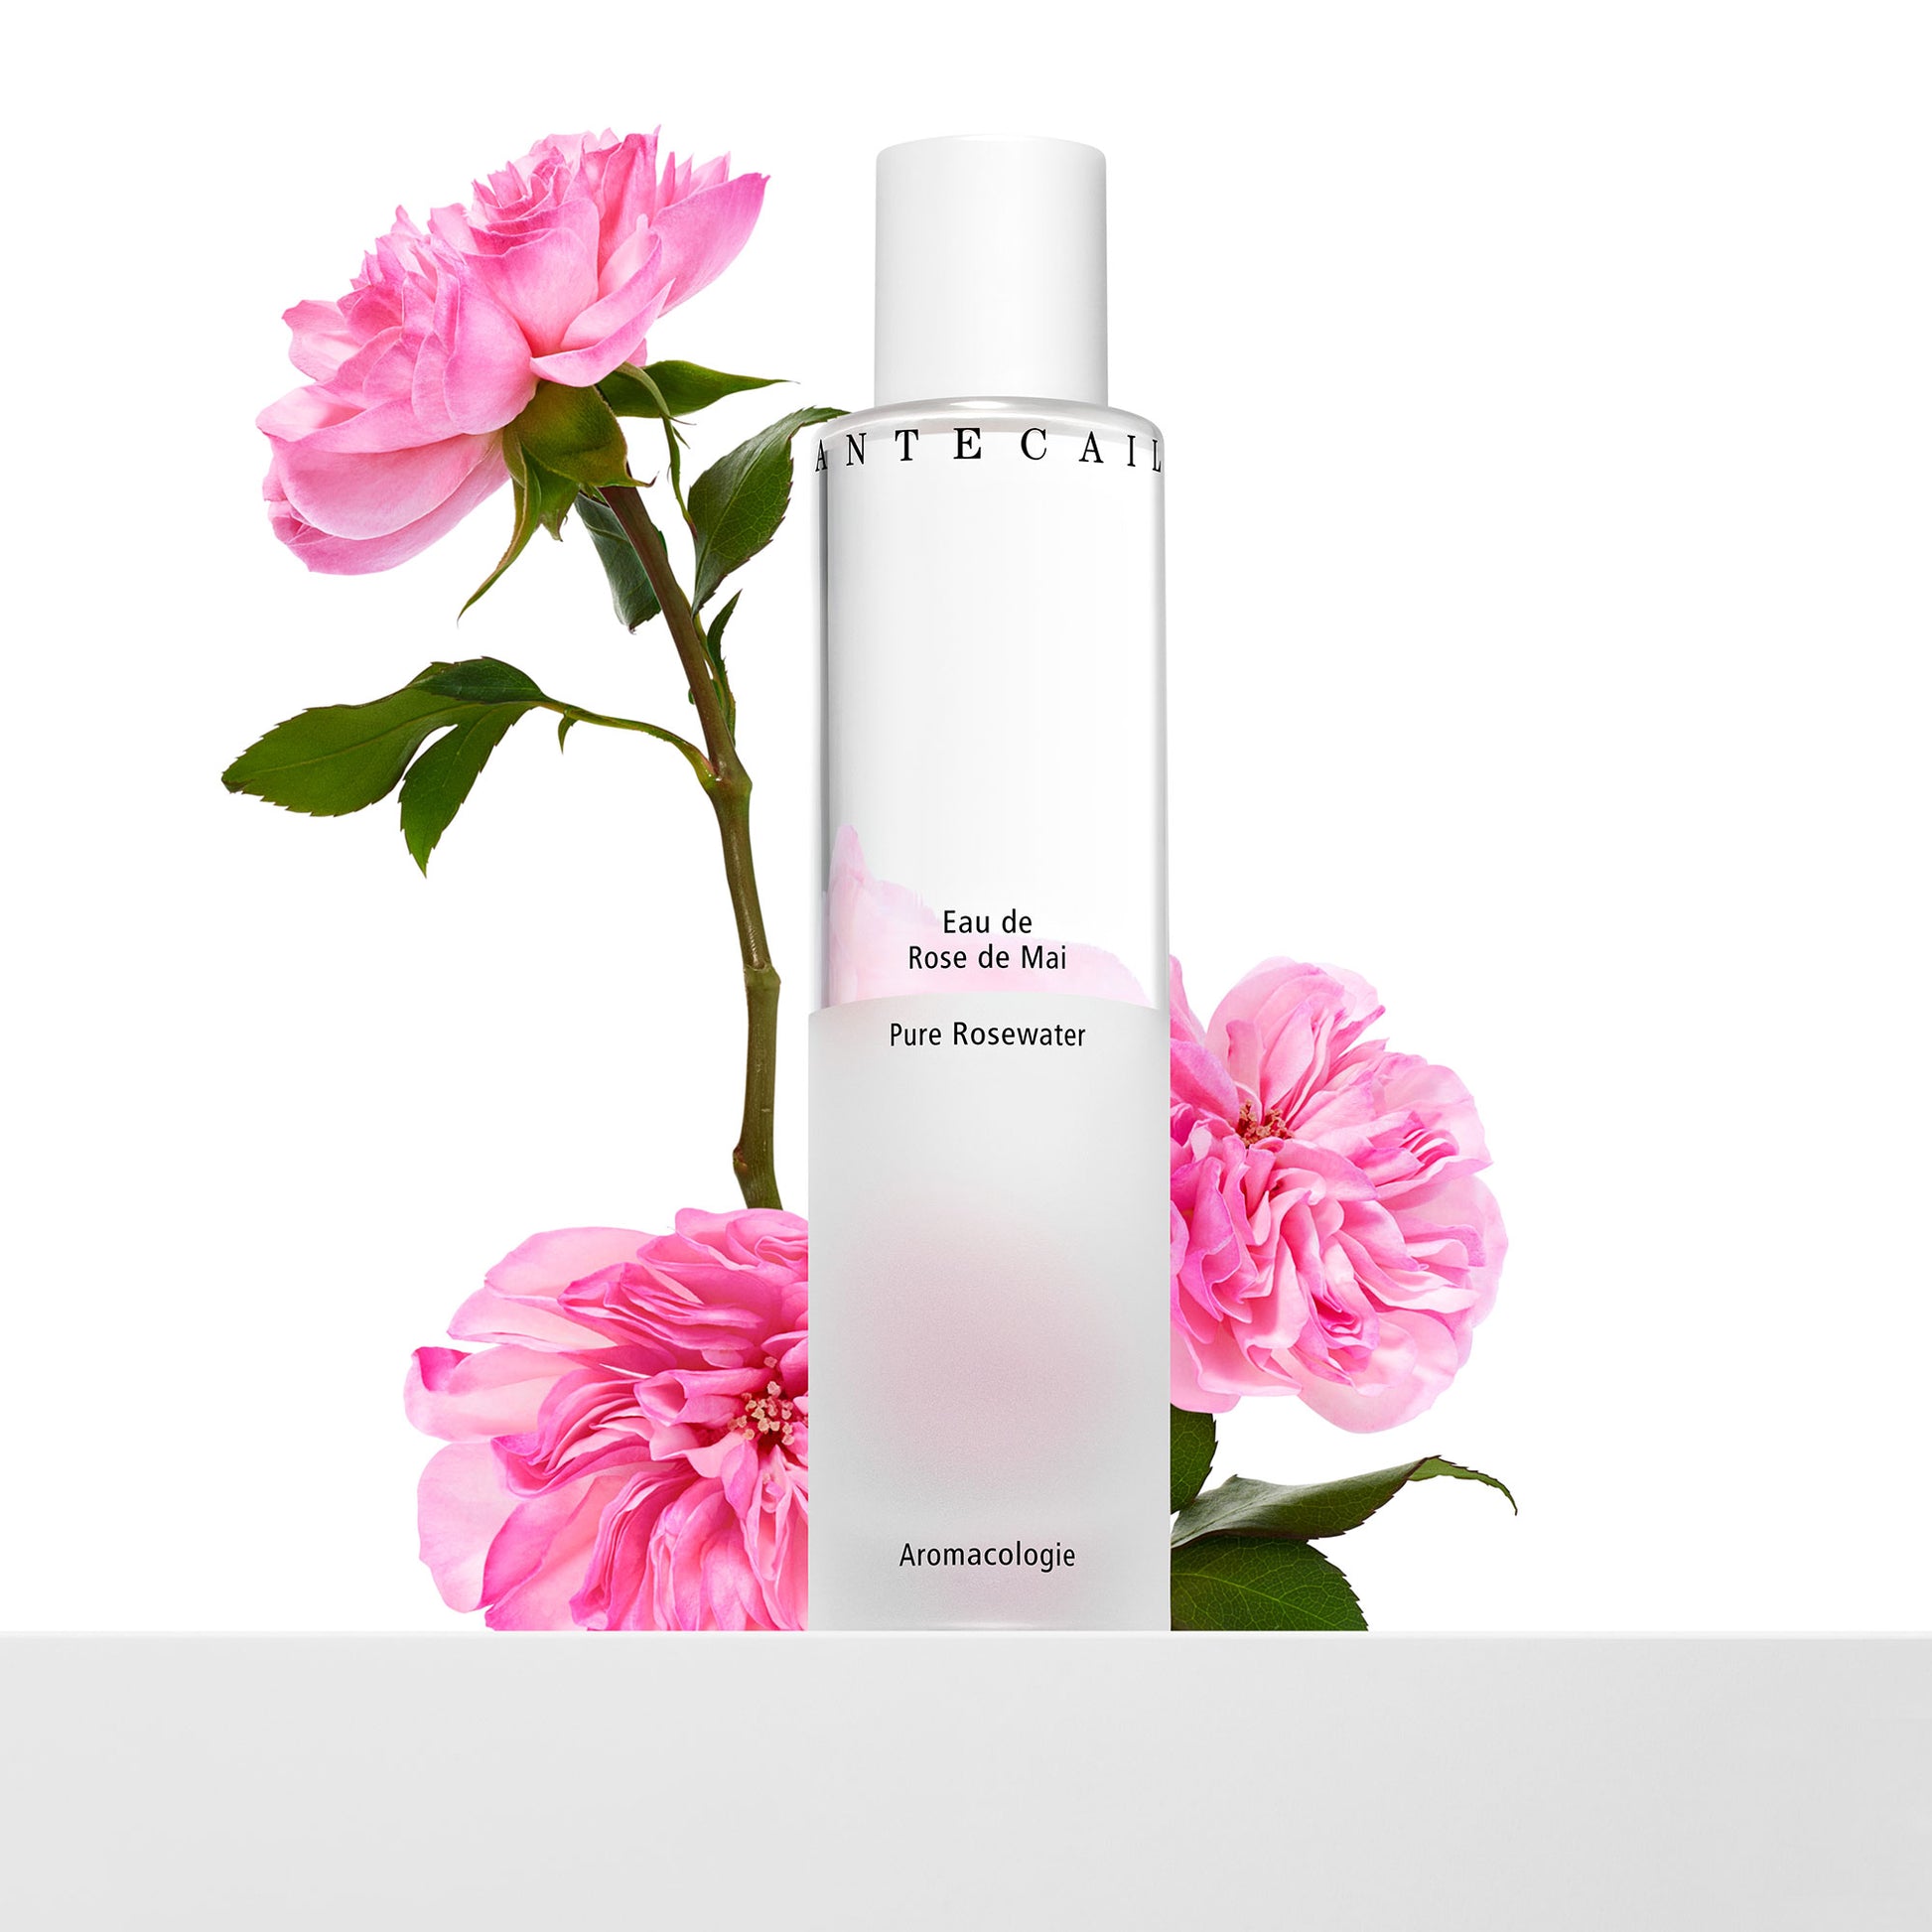 La French Rose - Hand Cleansing Spray